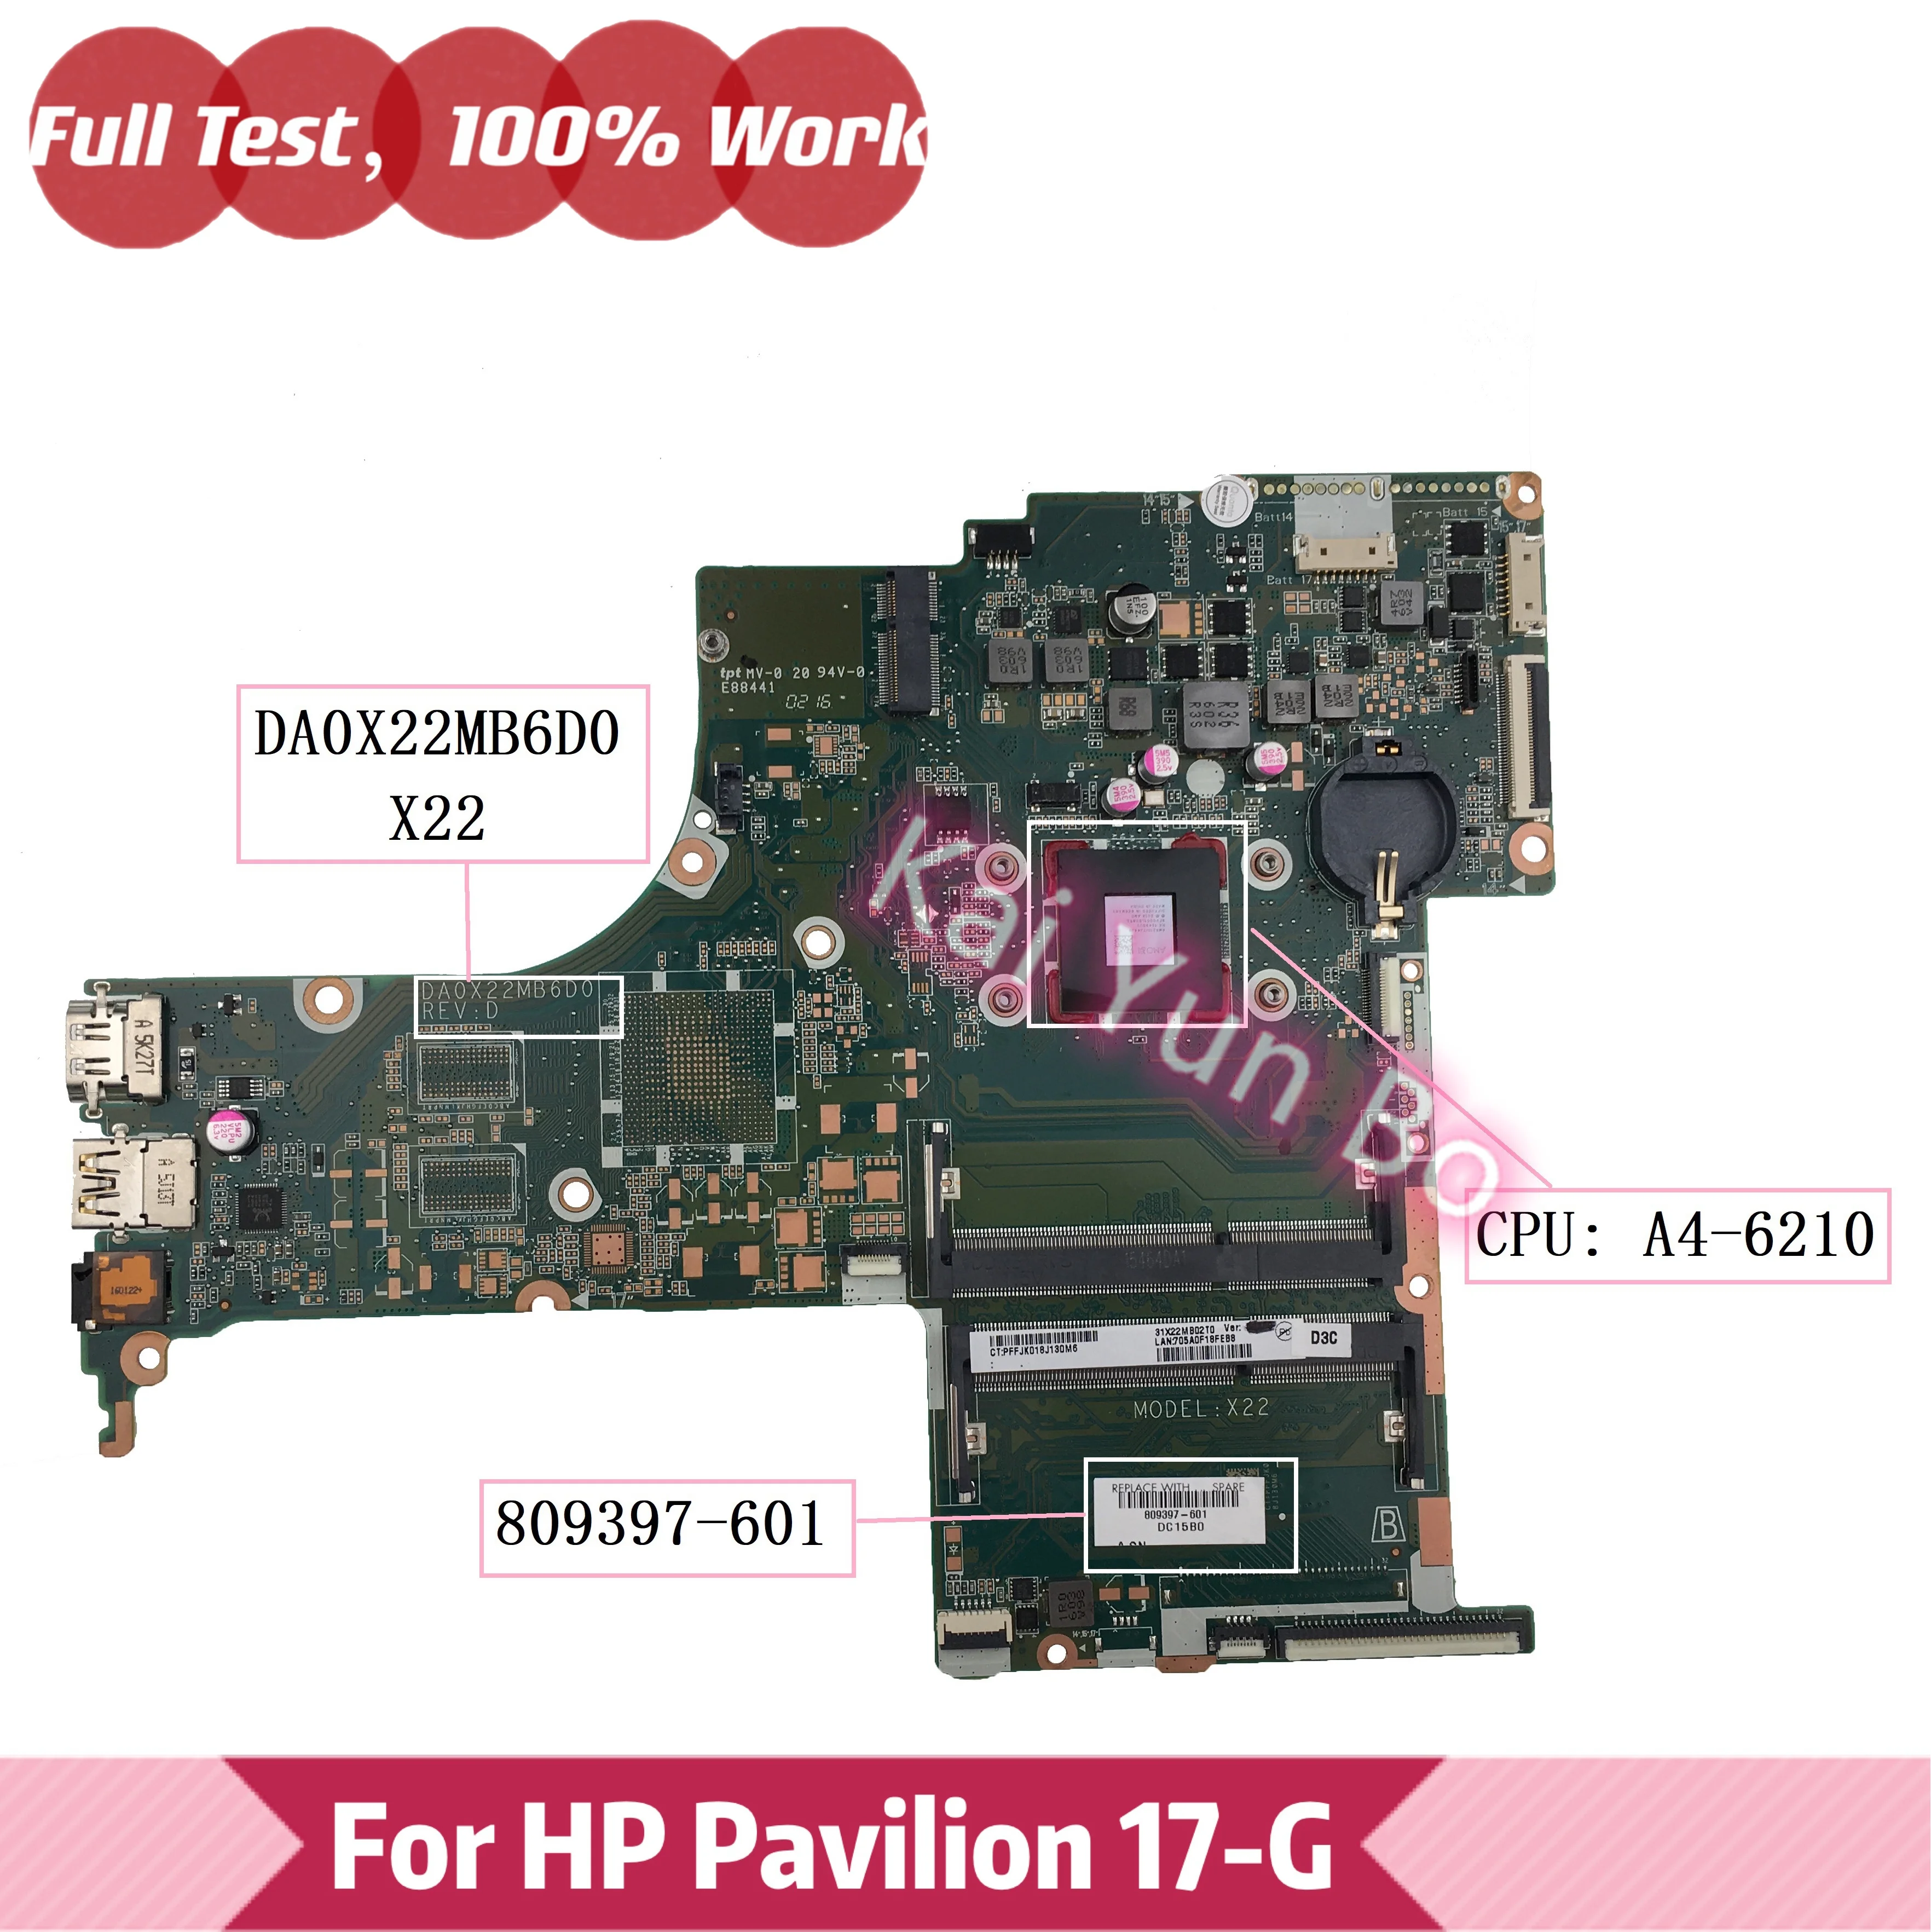 

809397-001 809397-501 DA0X22MB6D0 X22 For HP PavIiion 17-G Laptop Motherboard 809397-601 with A4-6210 CPU DDR3 100% Tested OK